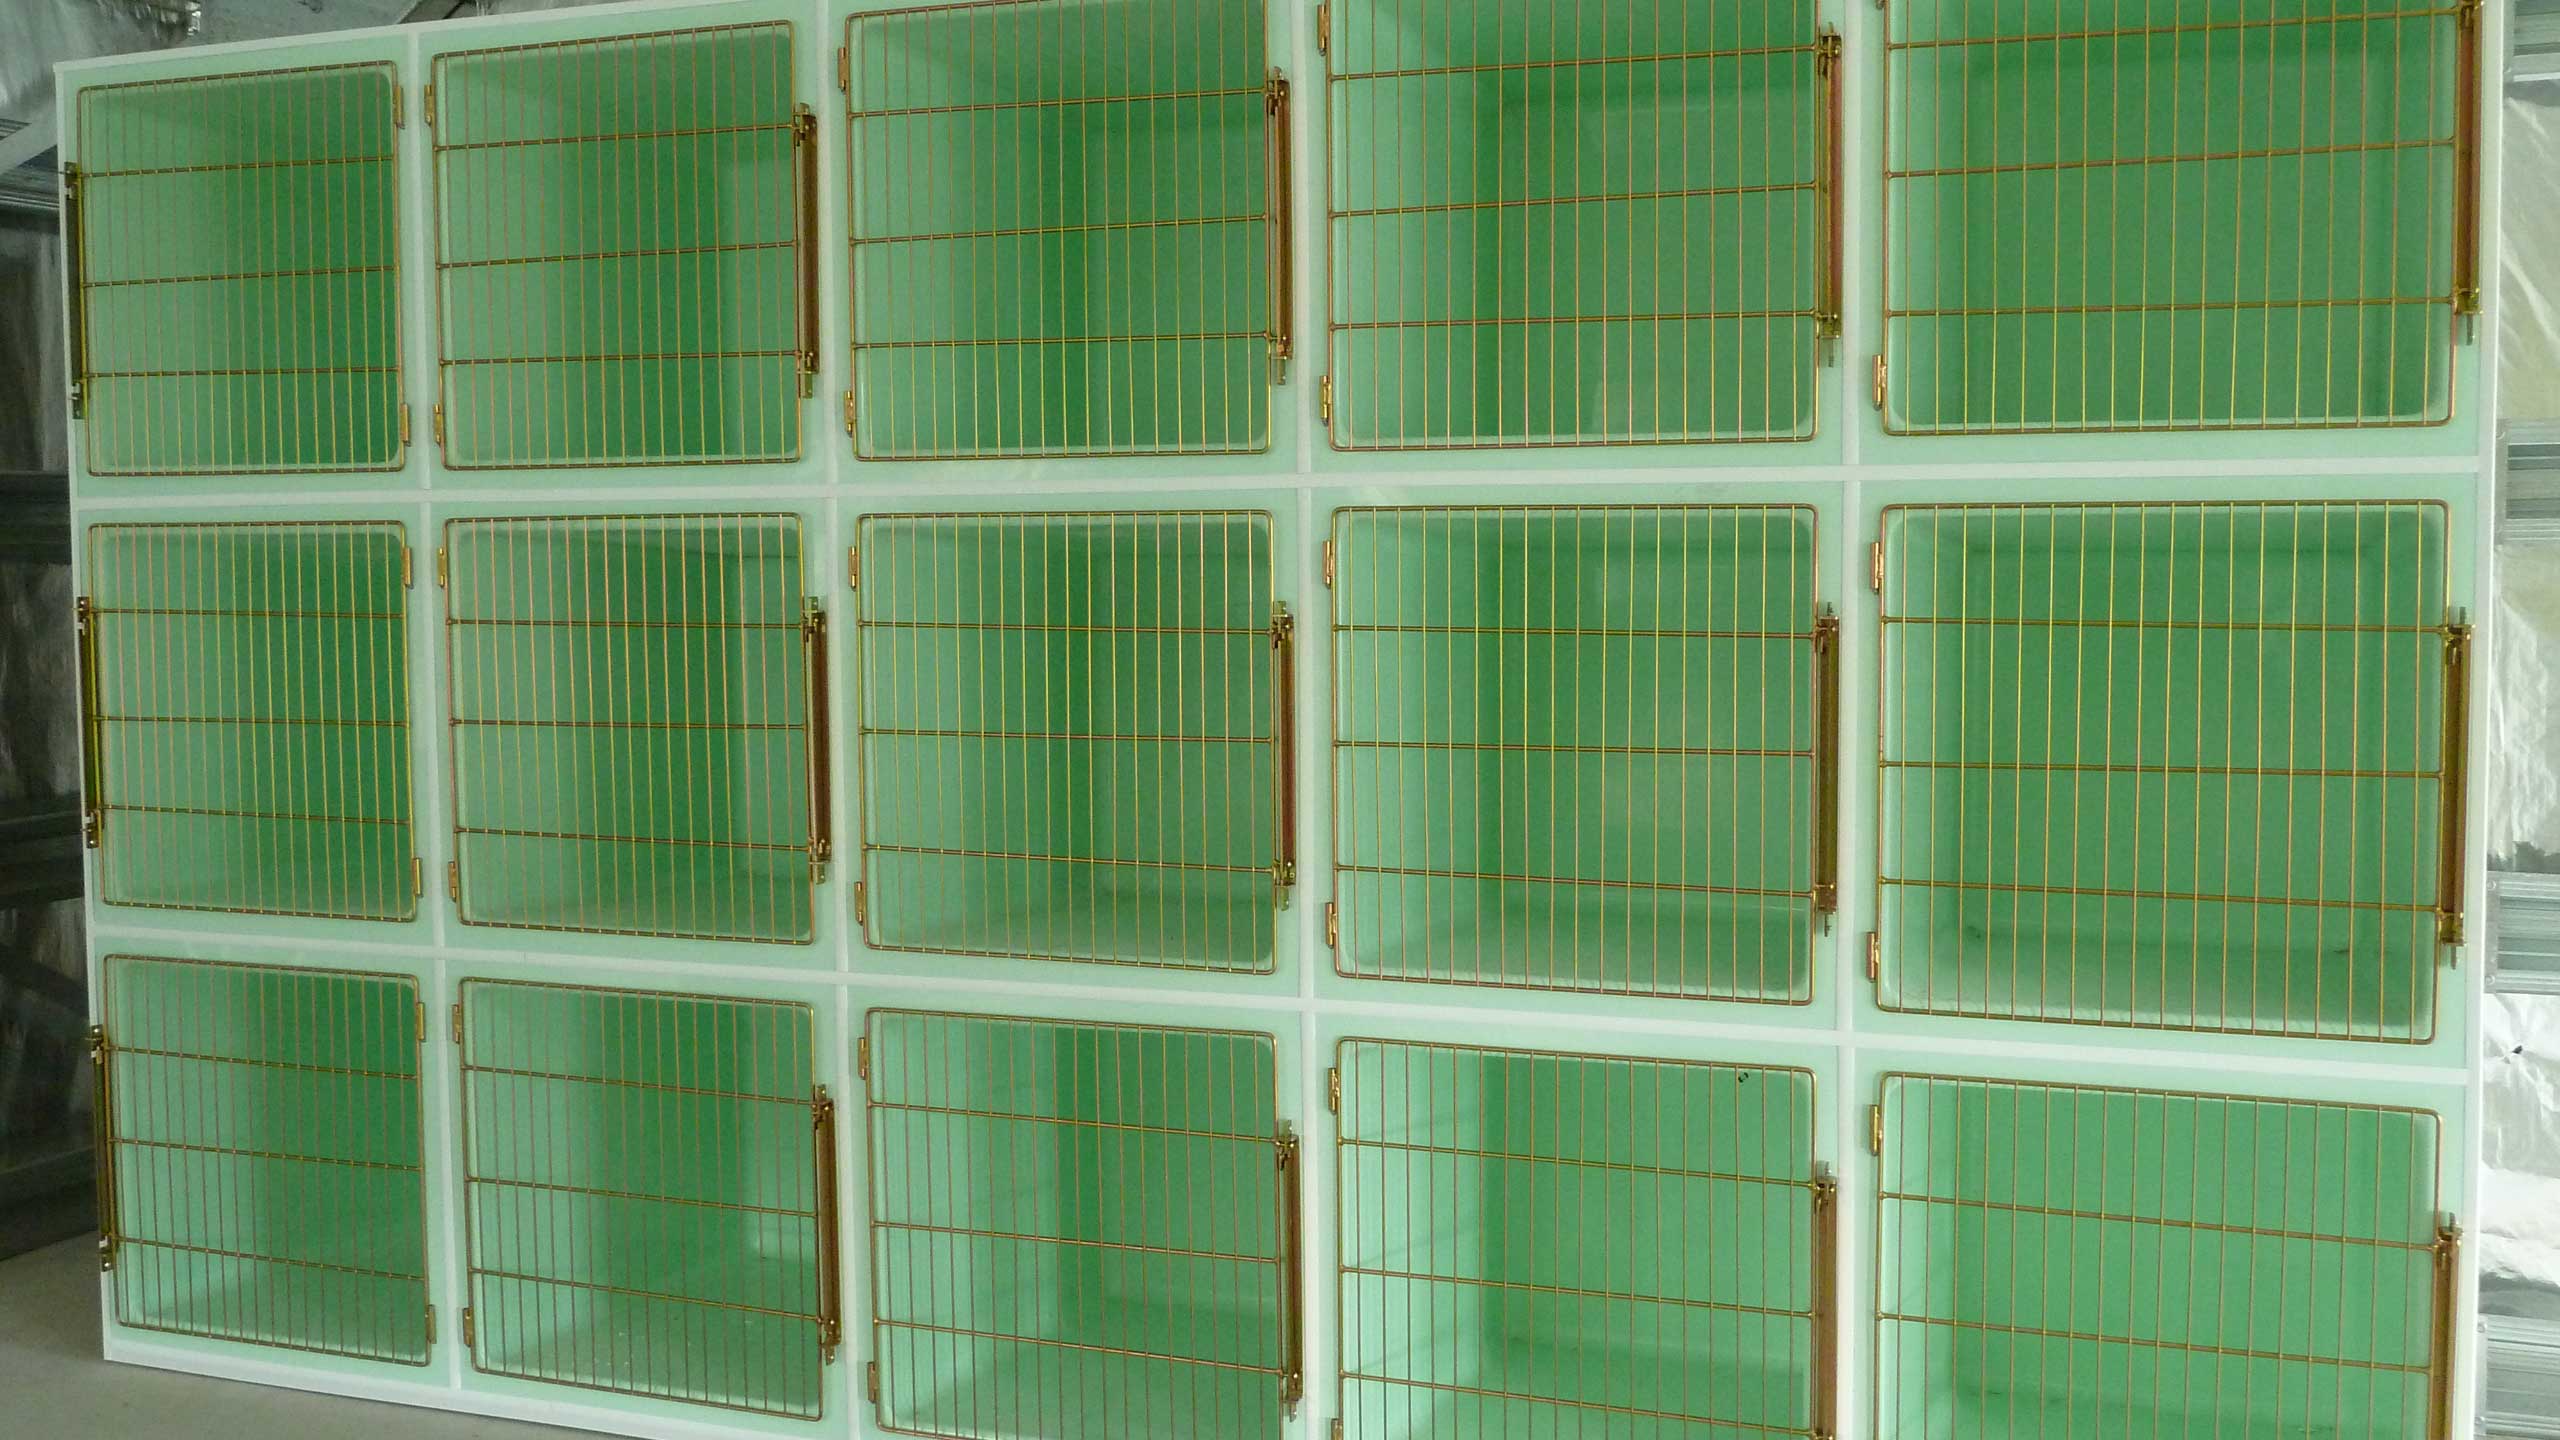 Creature Comfort Cages cage bank: 5 x 3 Cat Cages